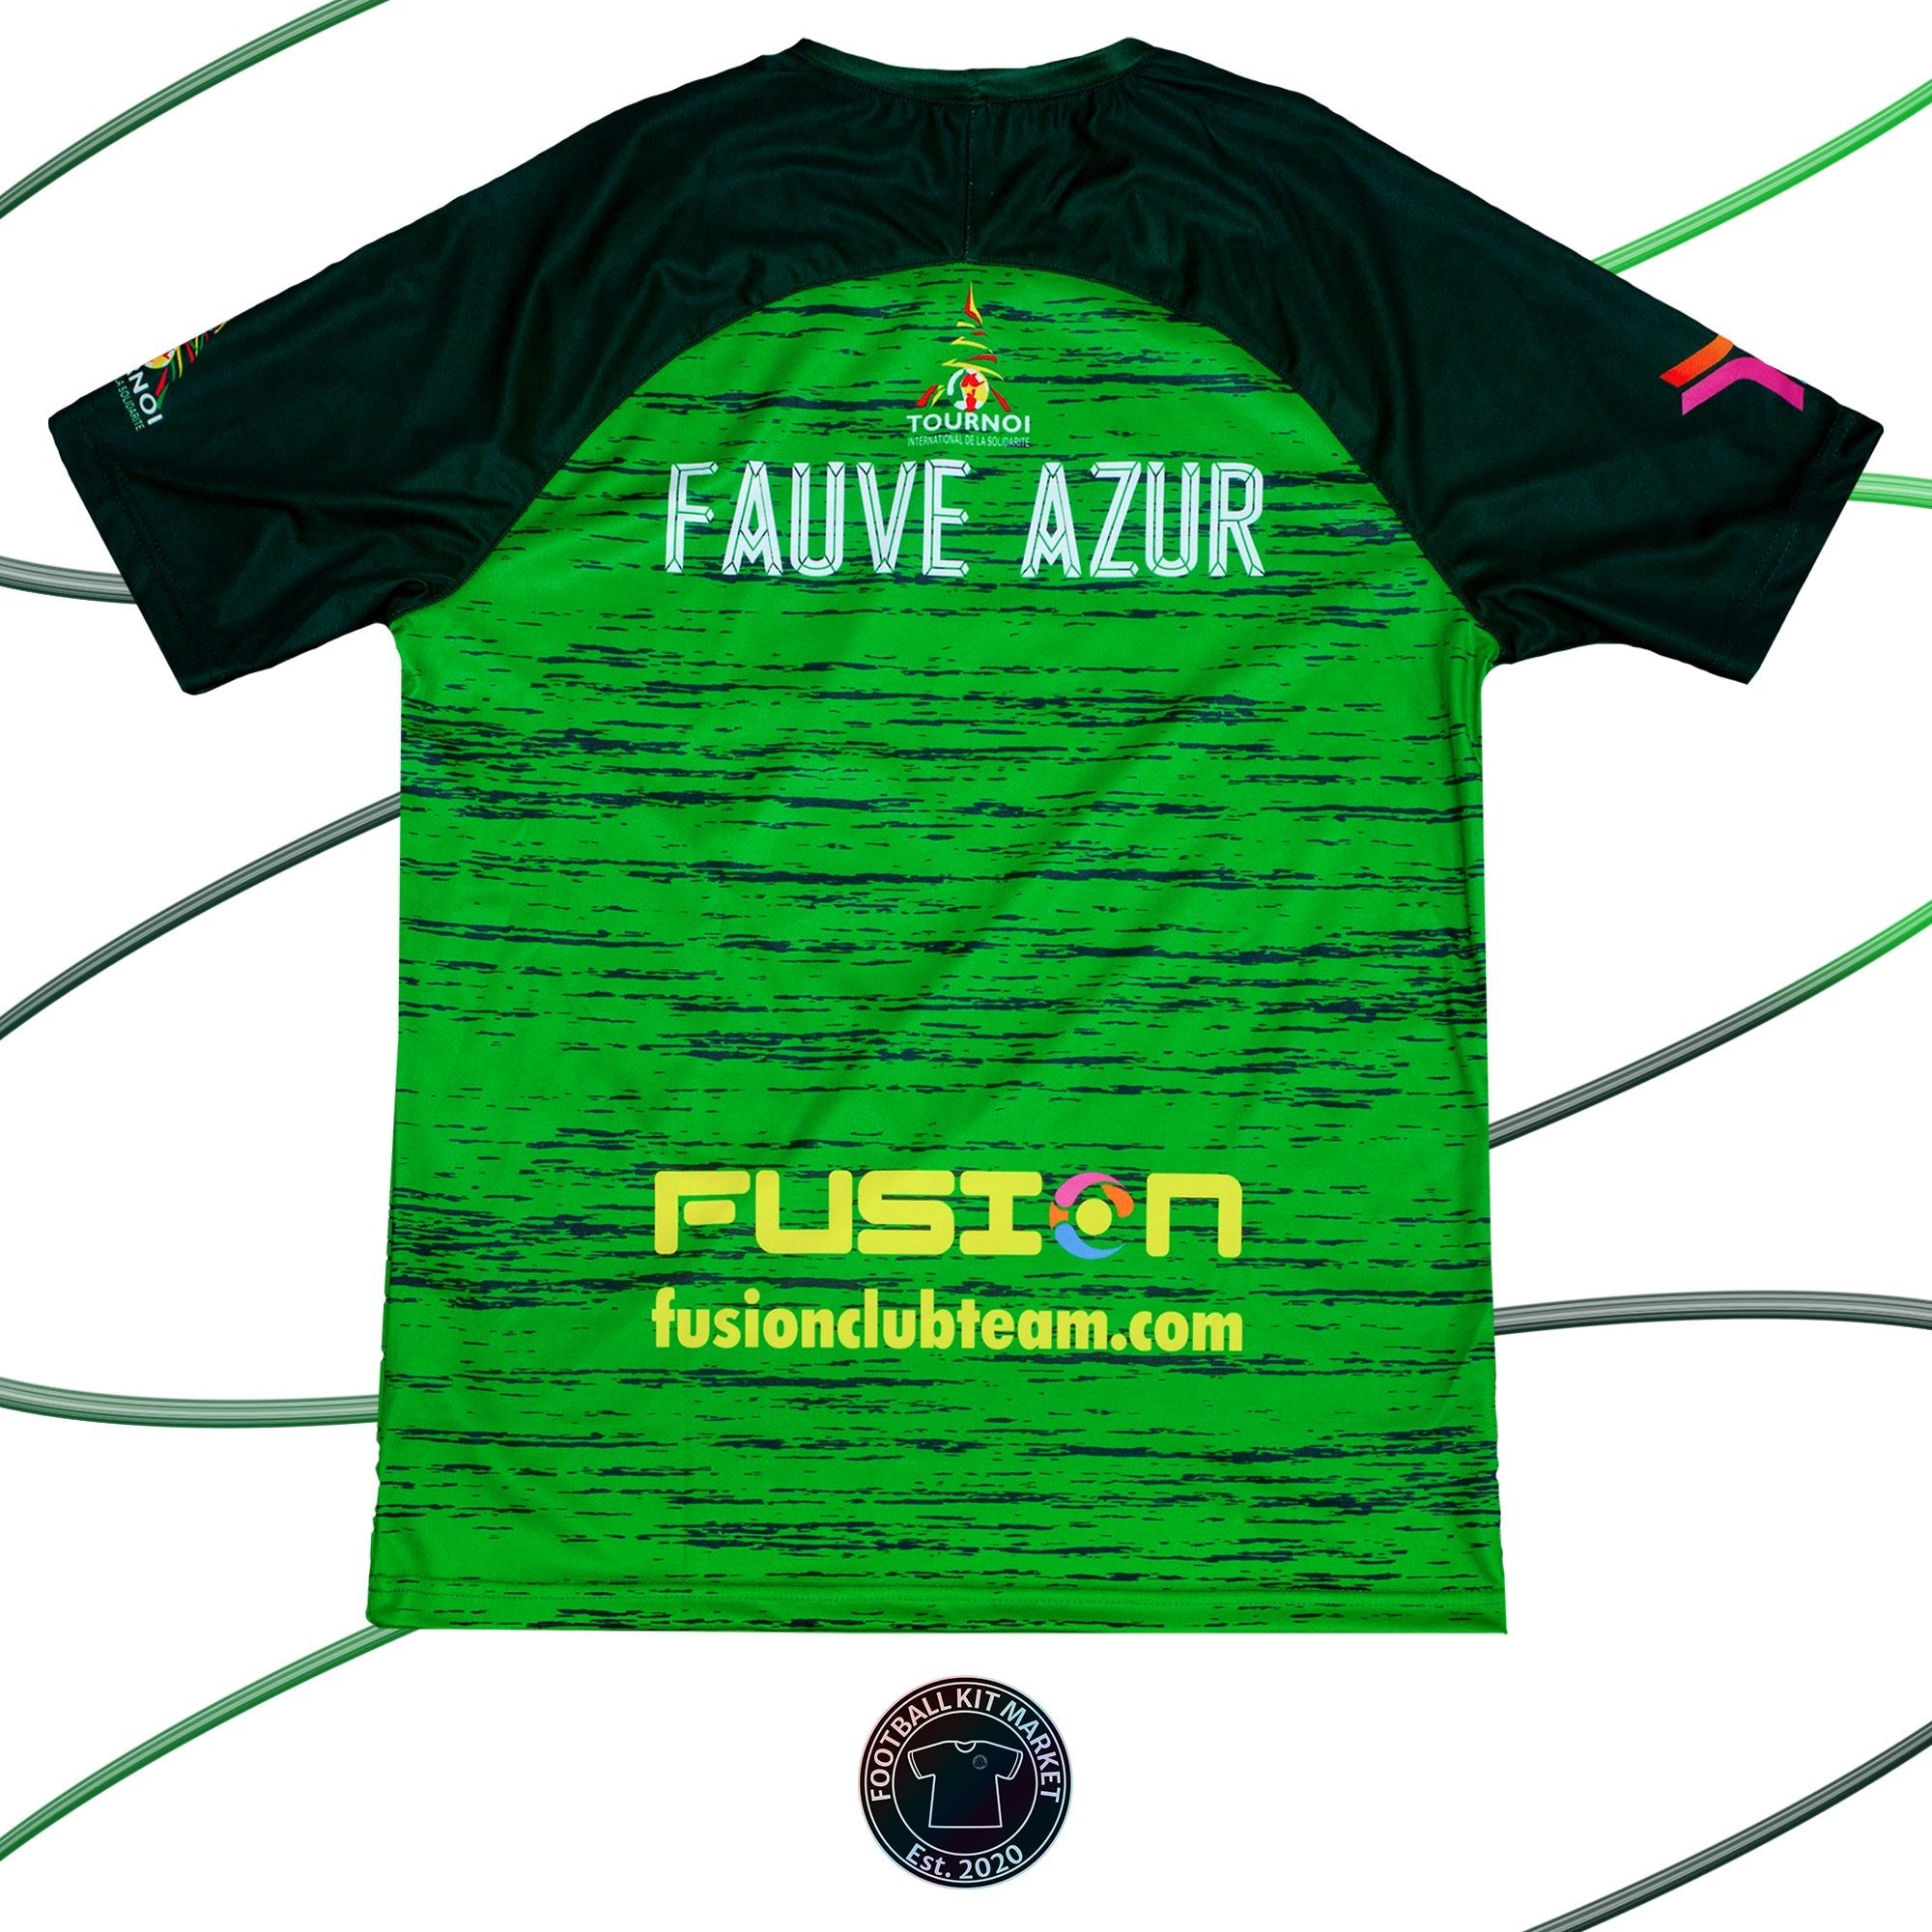 Genuine FAUVE AZUR Home Shirt (2021) - FUSION (XXL) - Product Image from Football Kit Market